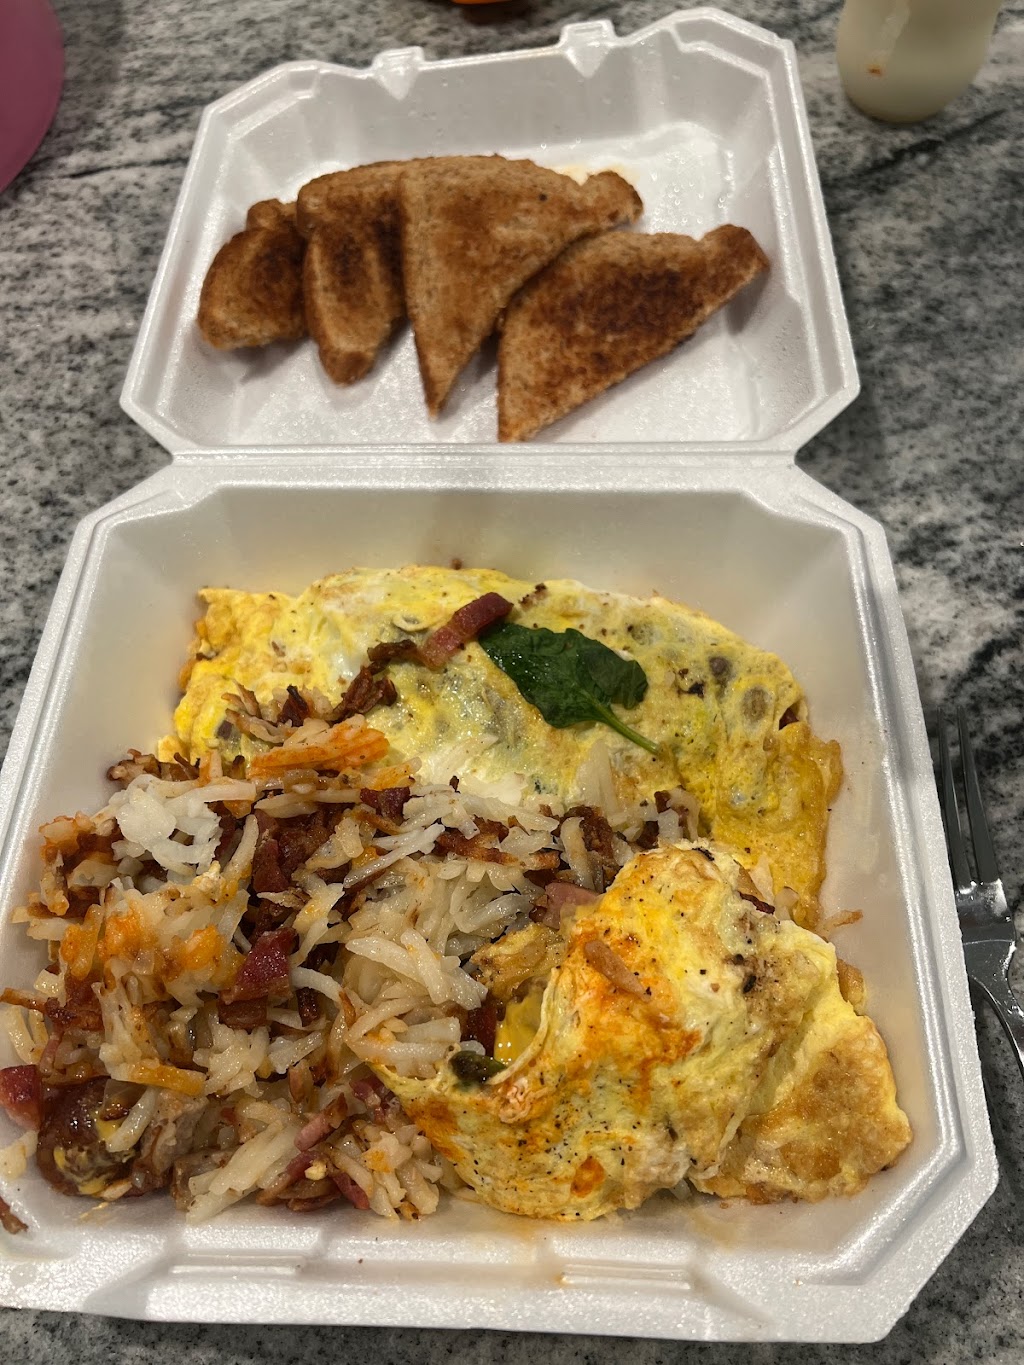 Omelettes and more Restaurant | restaurant | 1707 S Mission St, Mt Pleasant, MI 48858, USA | 9893173387 OR +1 989-317-3387